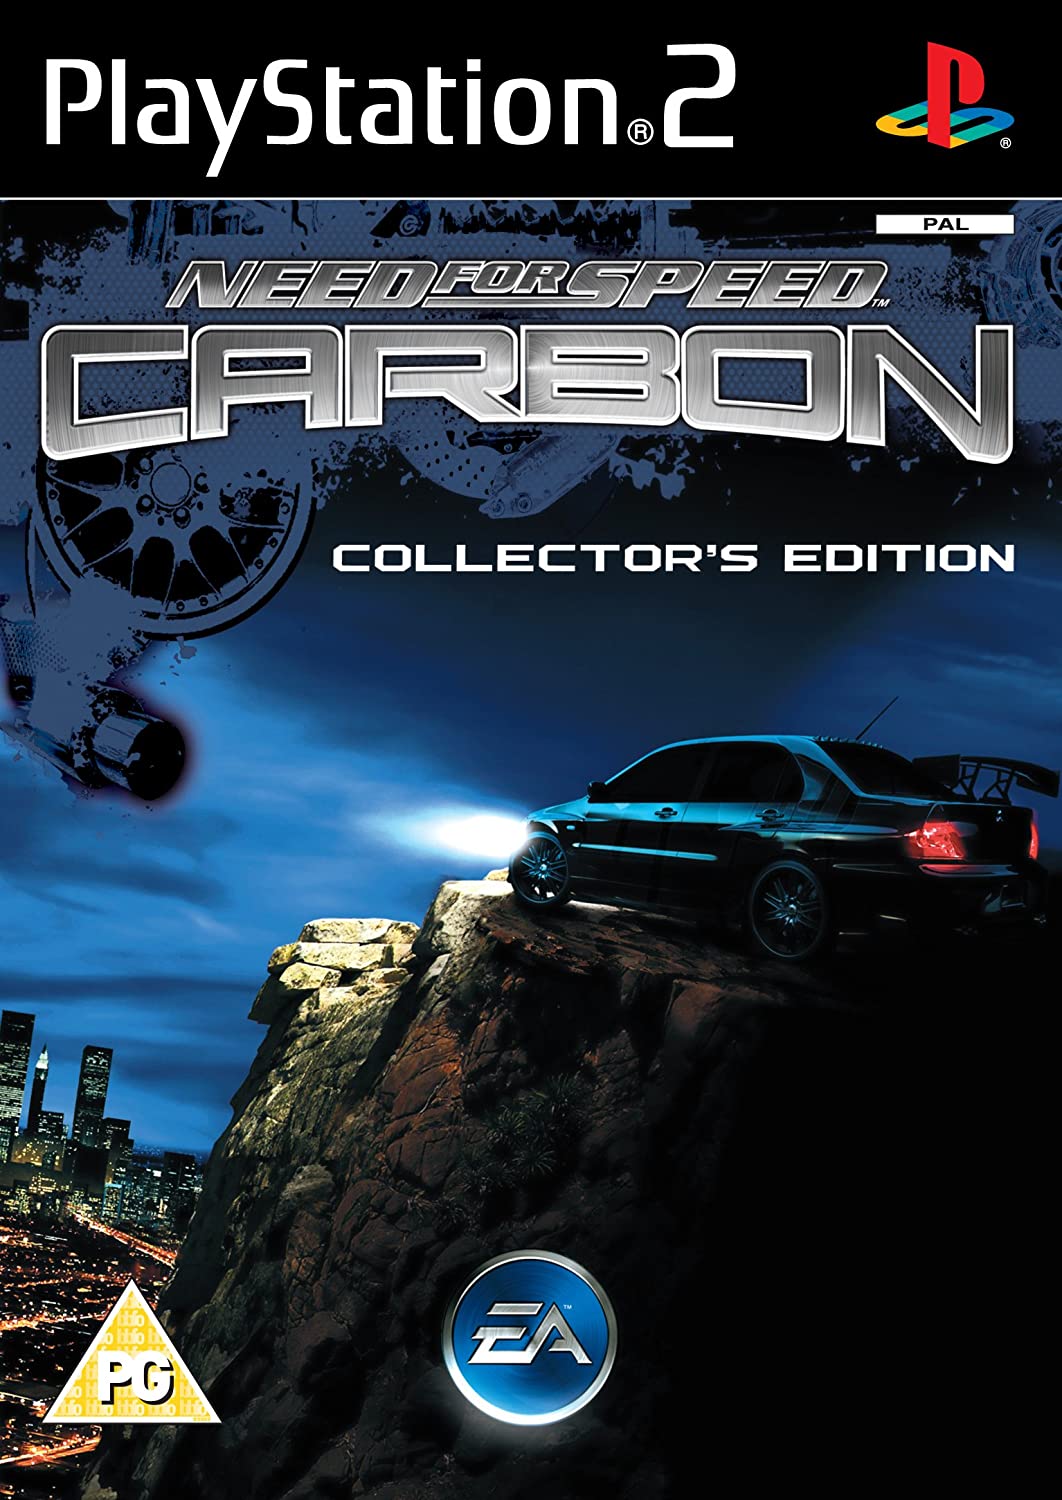 Need For Speed Colletors Edition (8592) (PS2)